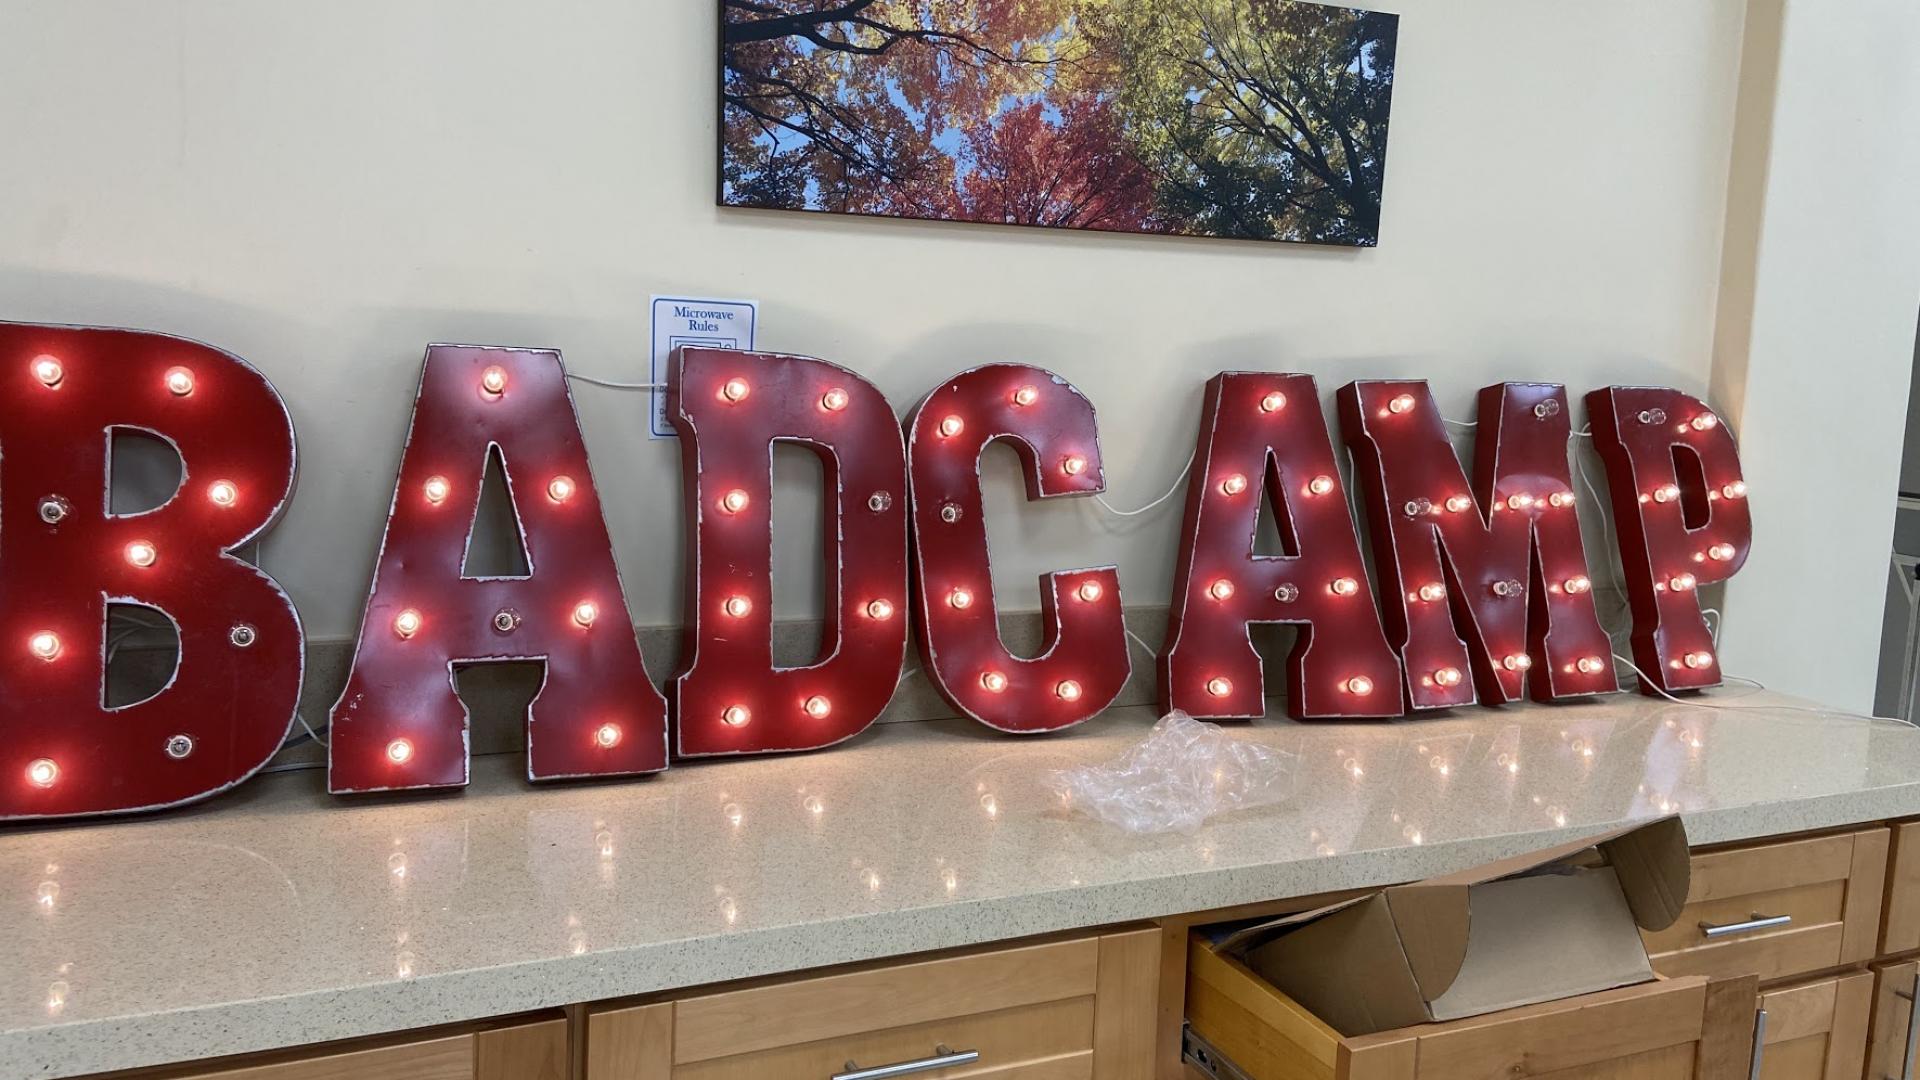 Illumination lettering BADCAMP at the venue of Bay Area Drupal Camp 2022